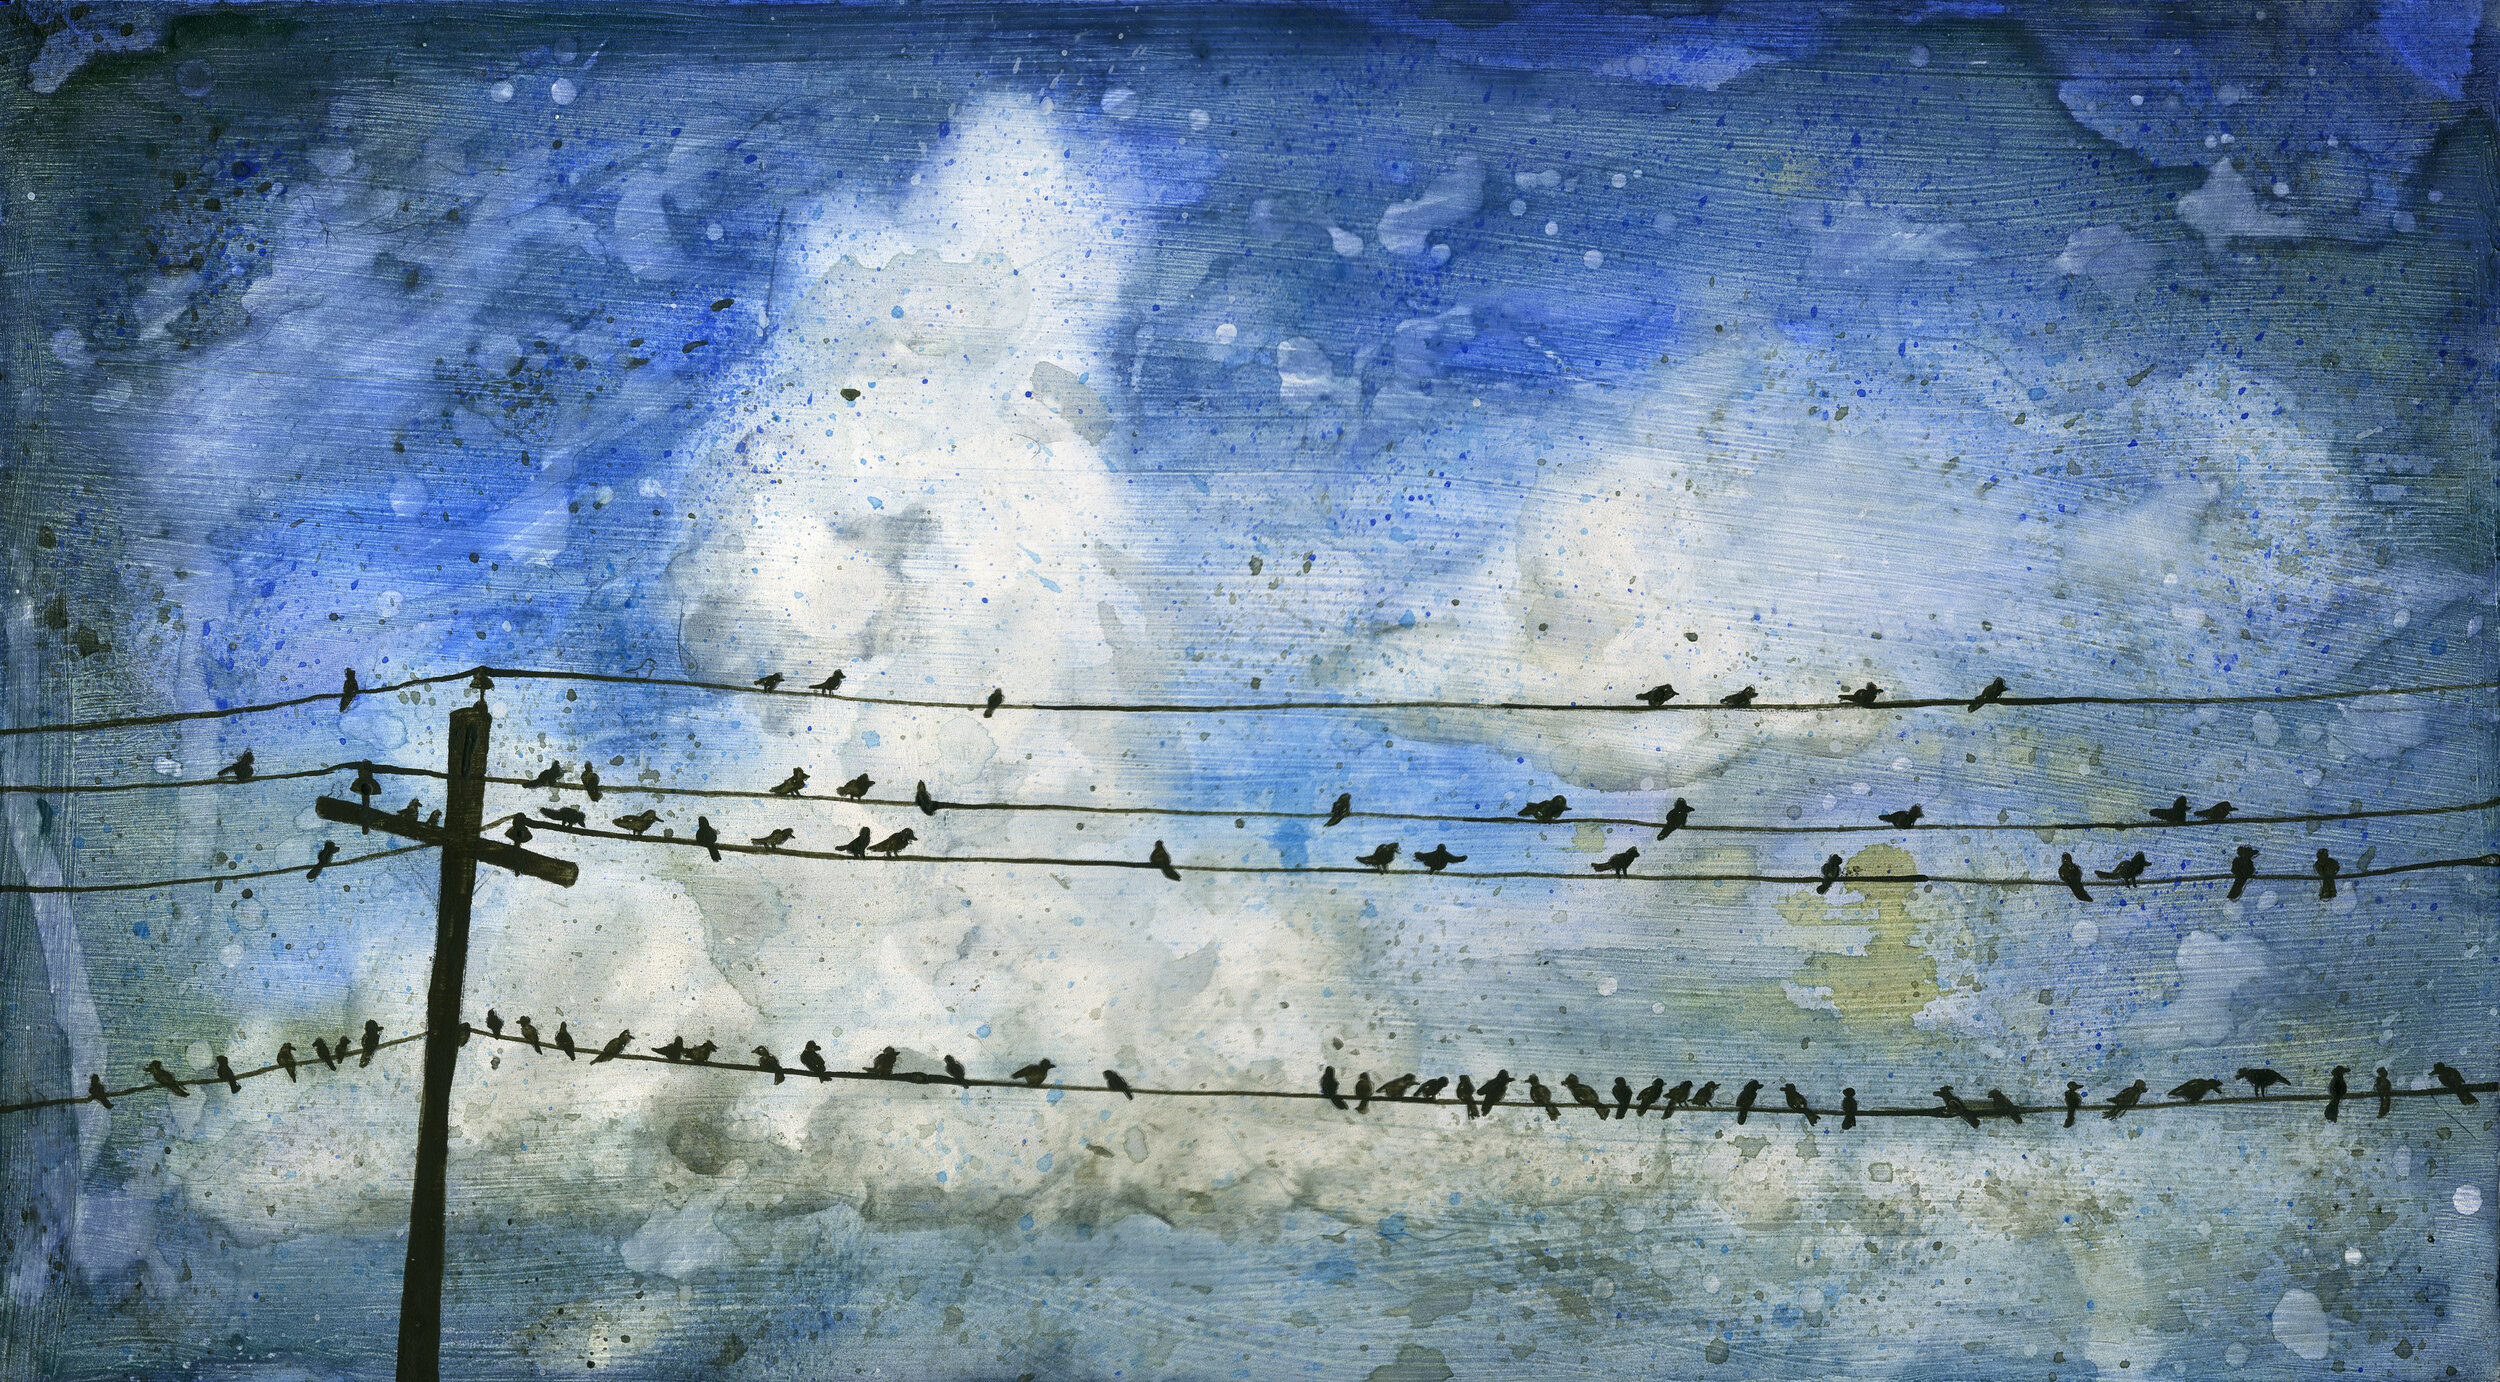 "Birds on a Wire" 2012